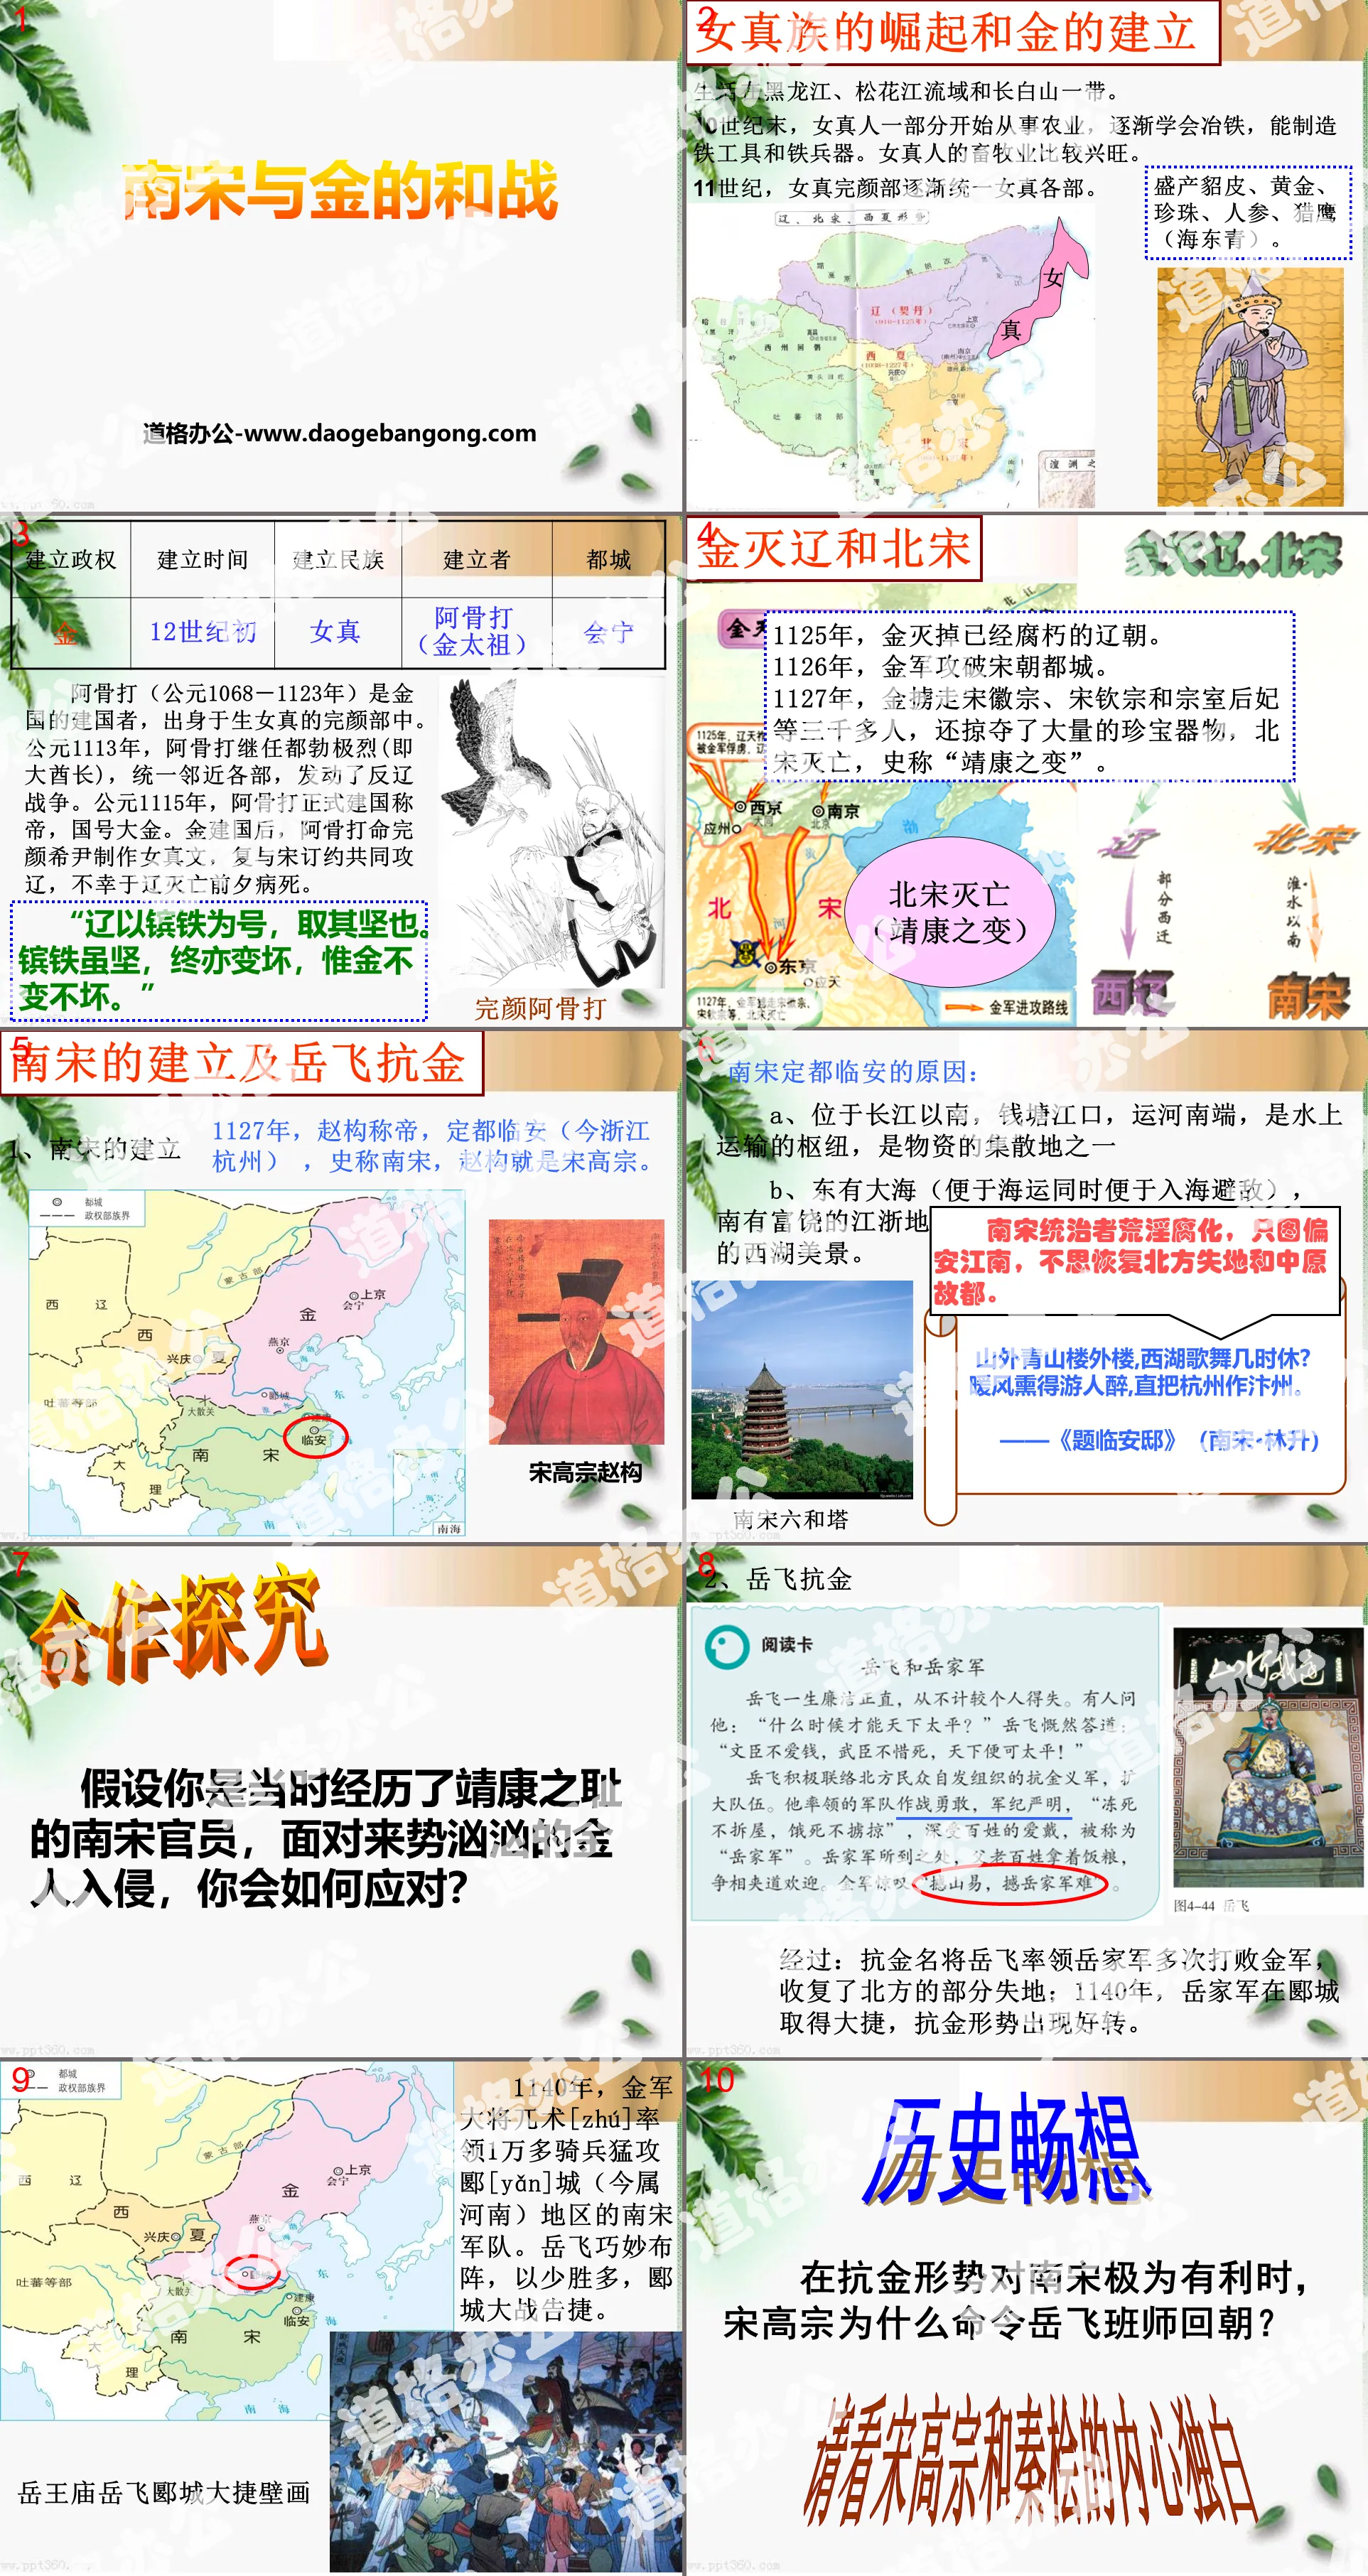 "The War between the Southern Song Dynasty and the Jin Dynasty" "Pluralistic Integration" Pattern and High-level Development of Civilization PPT